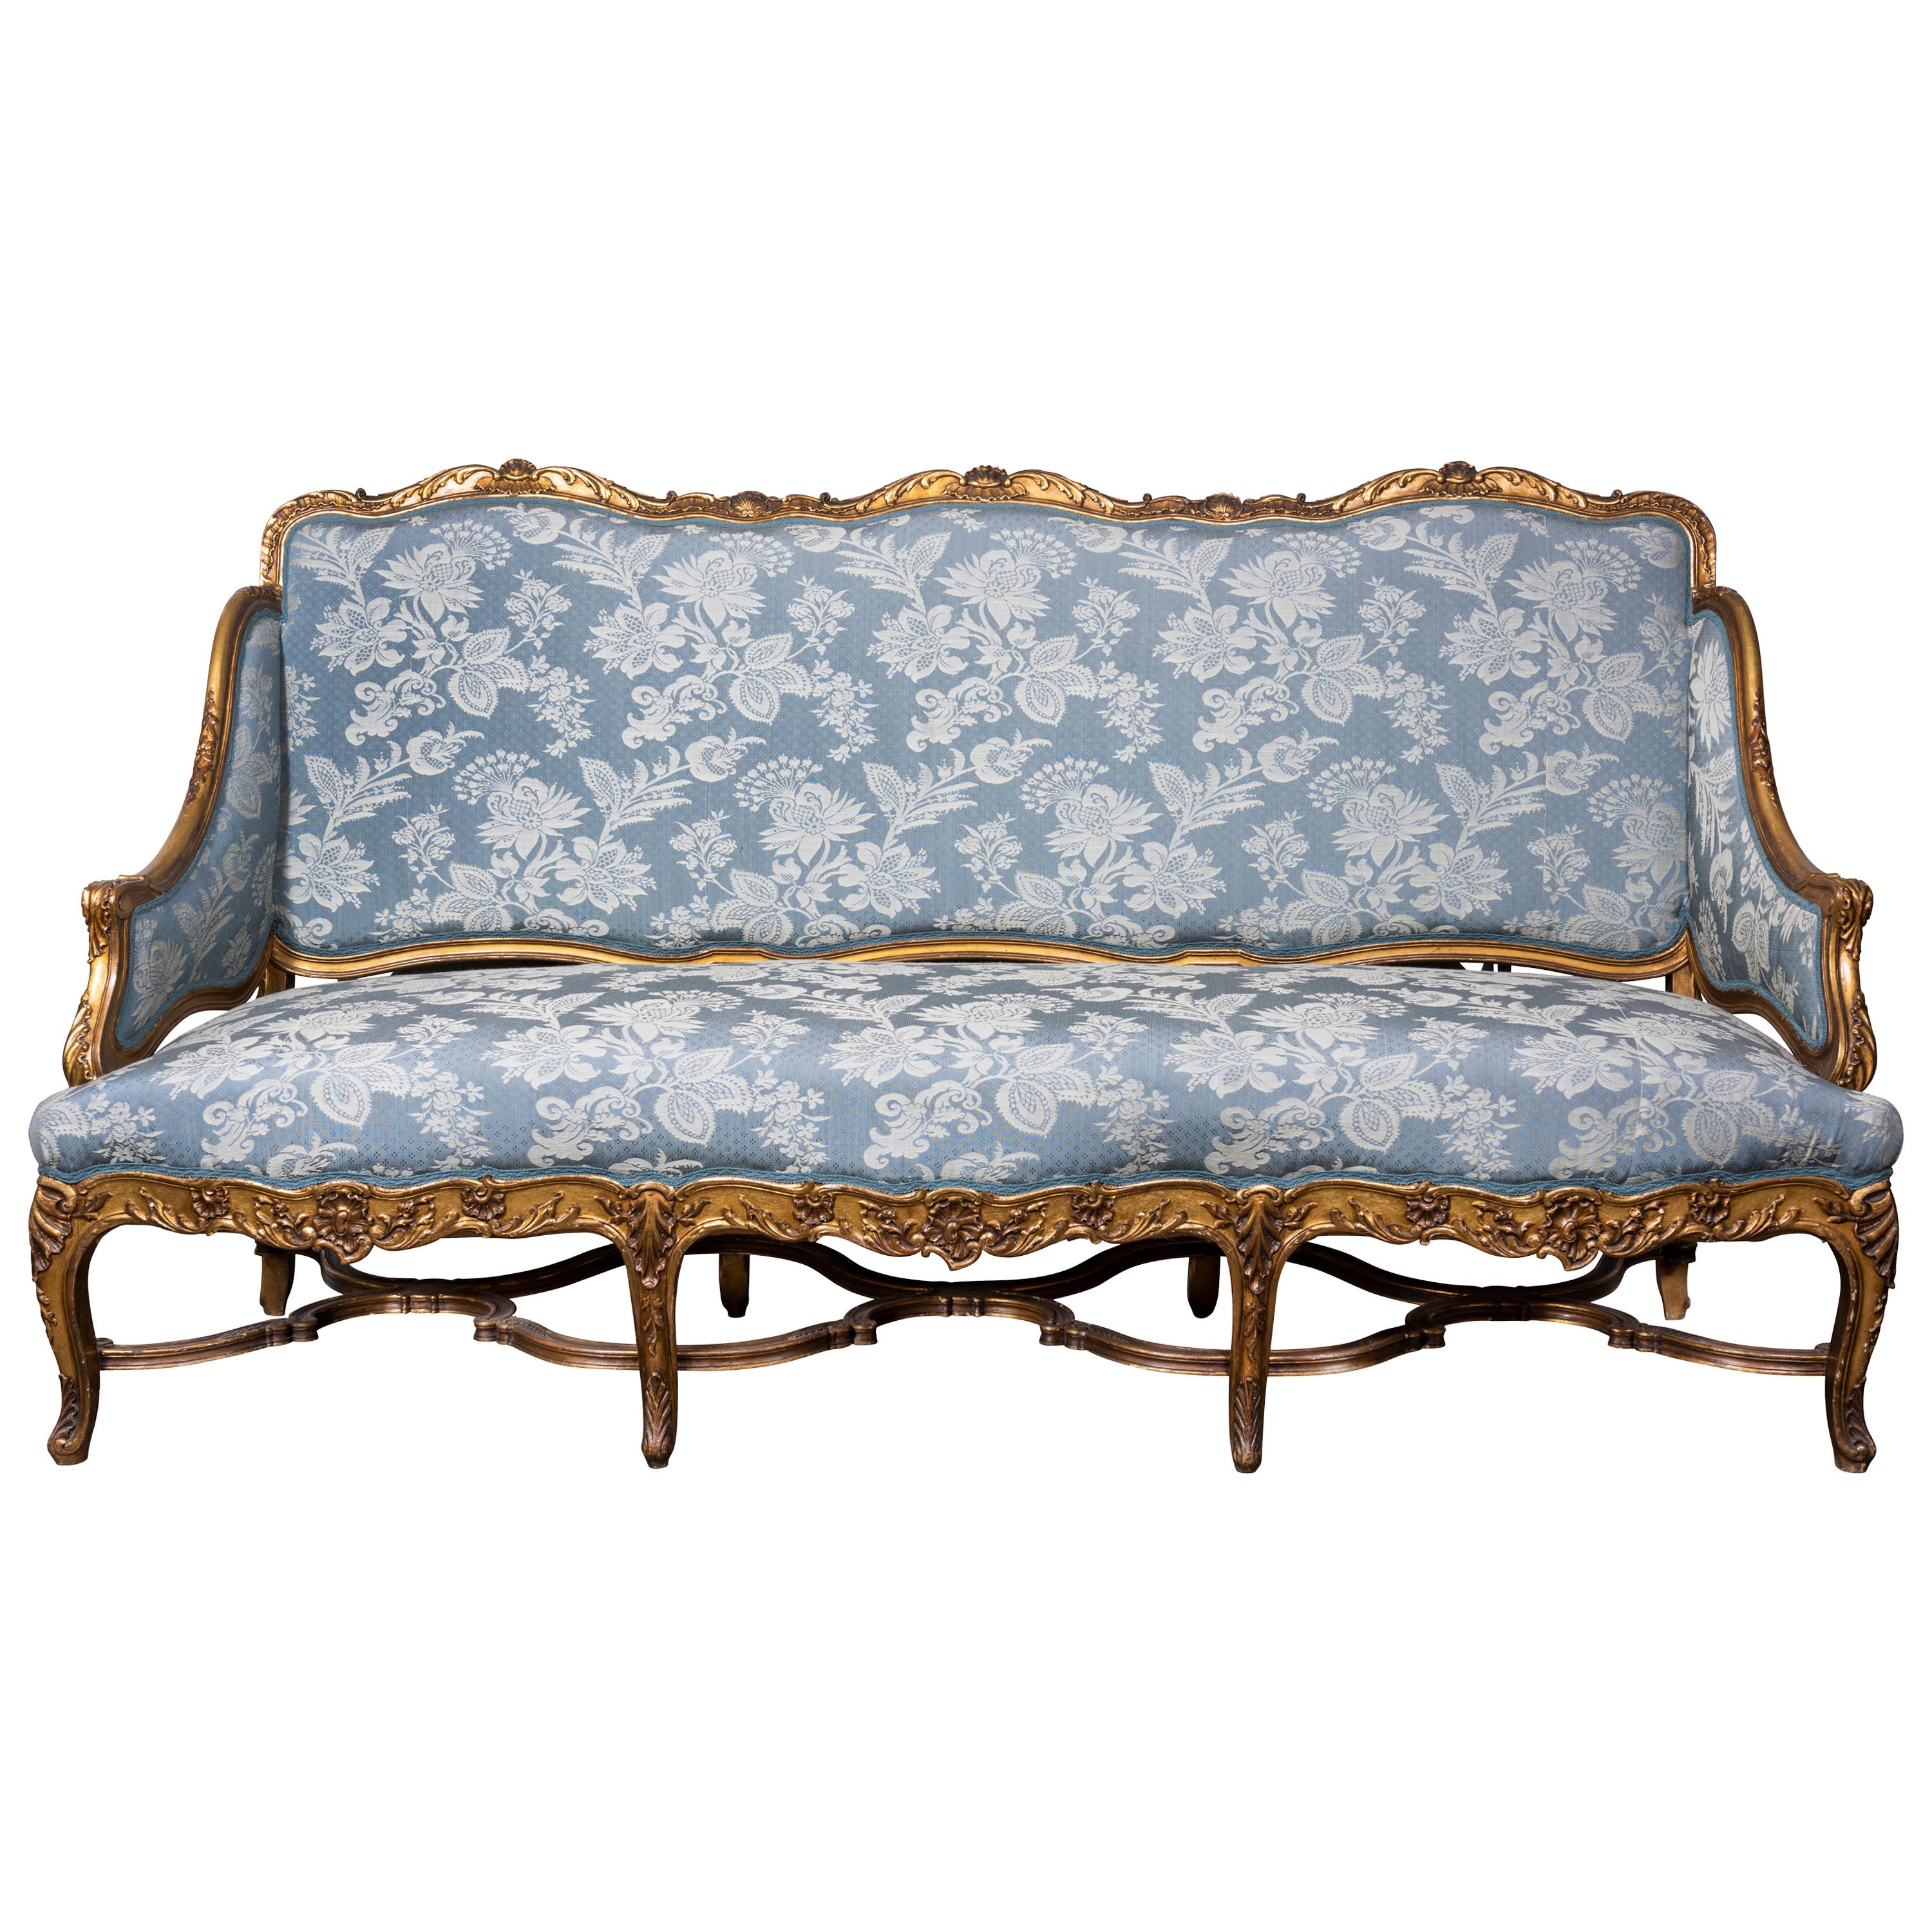 A 19th Century Serpentine Fronted Venetian Giltwood Divano For Sale